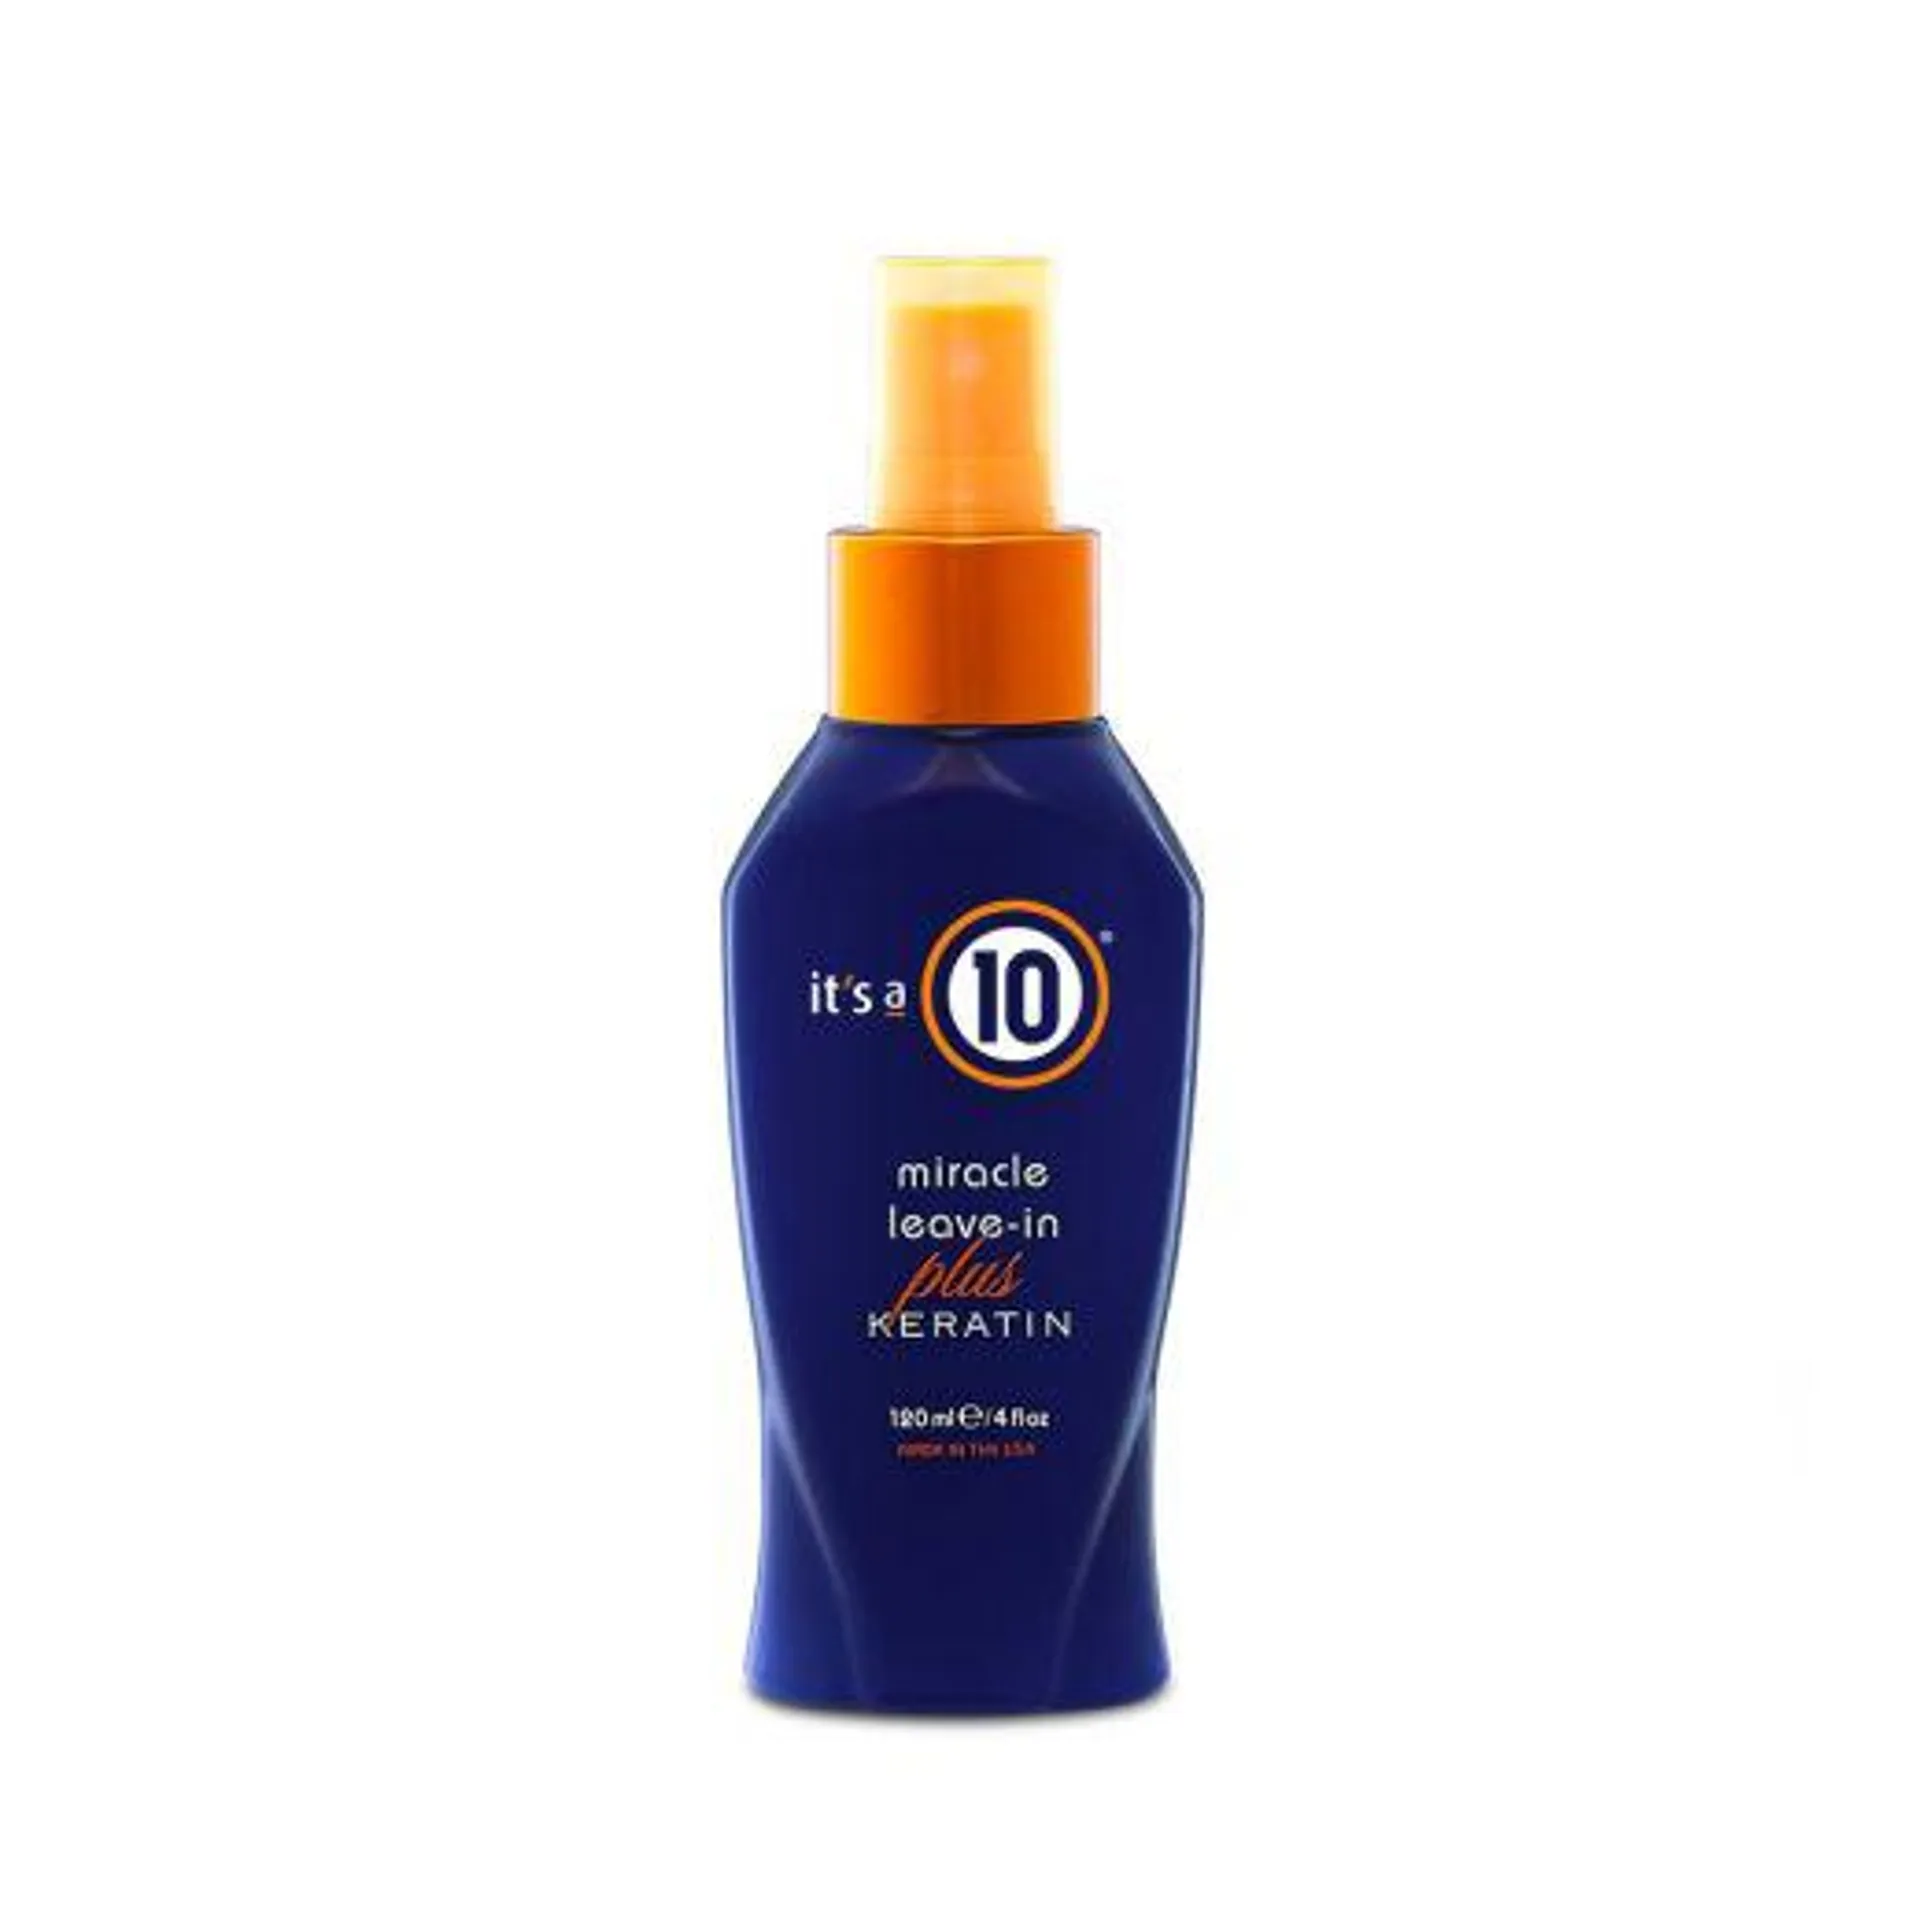 It’s a 10 Miracle Leave-in Plus Keratin Spray 120ml